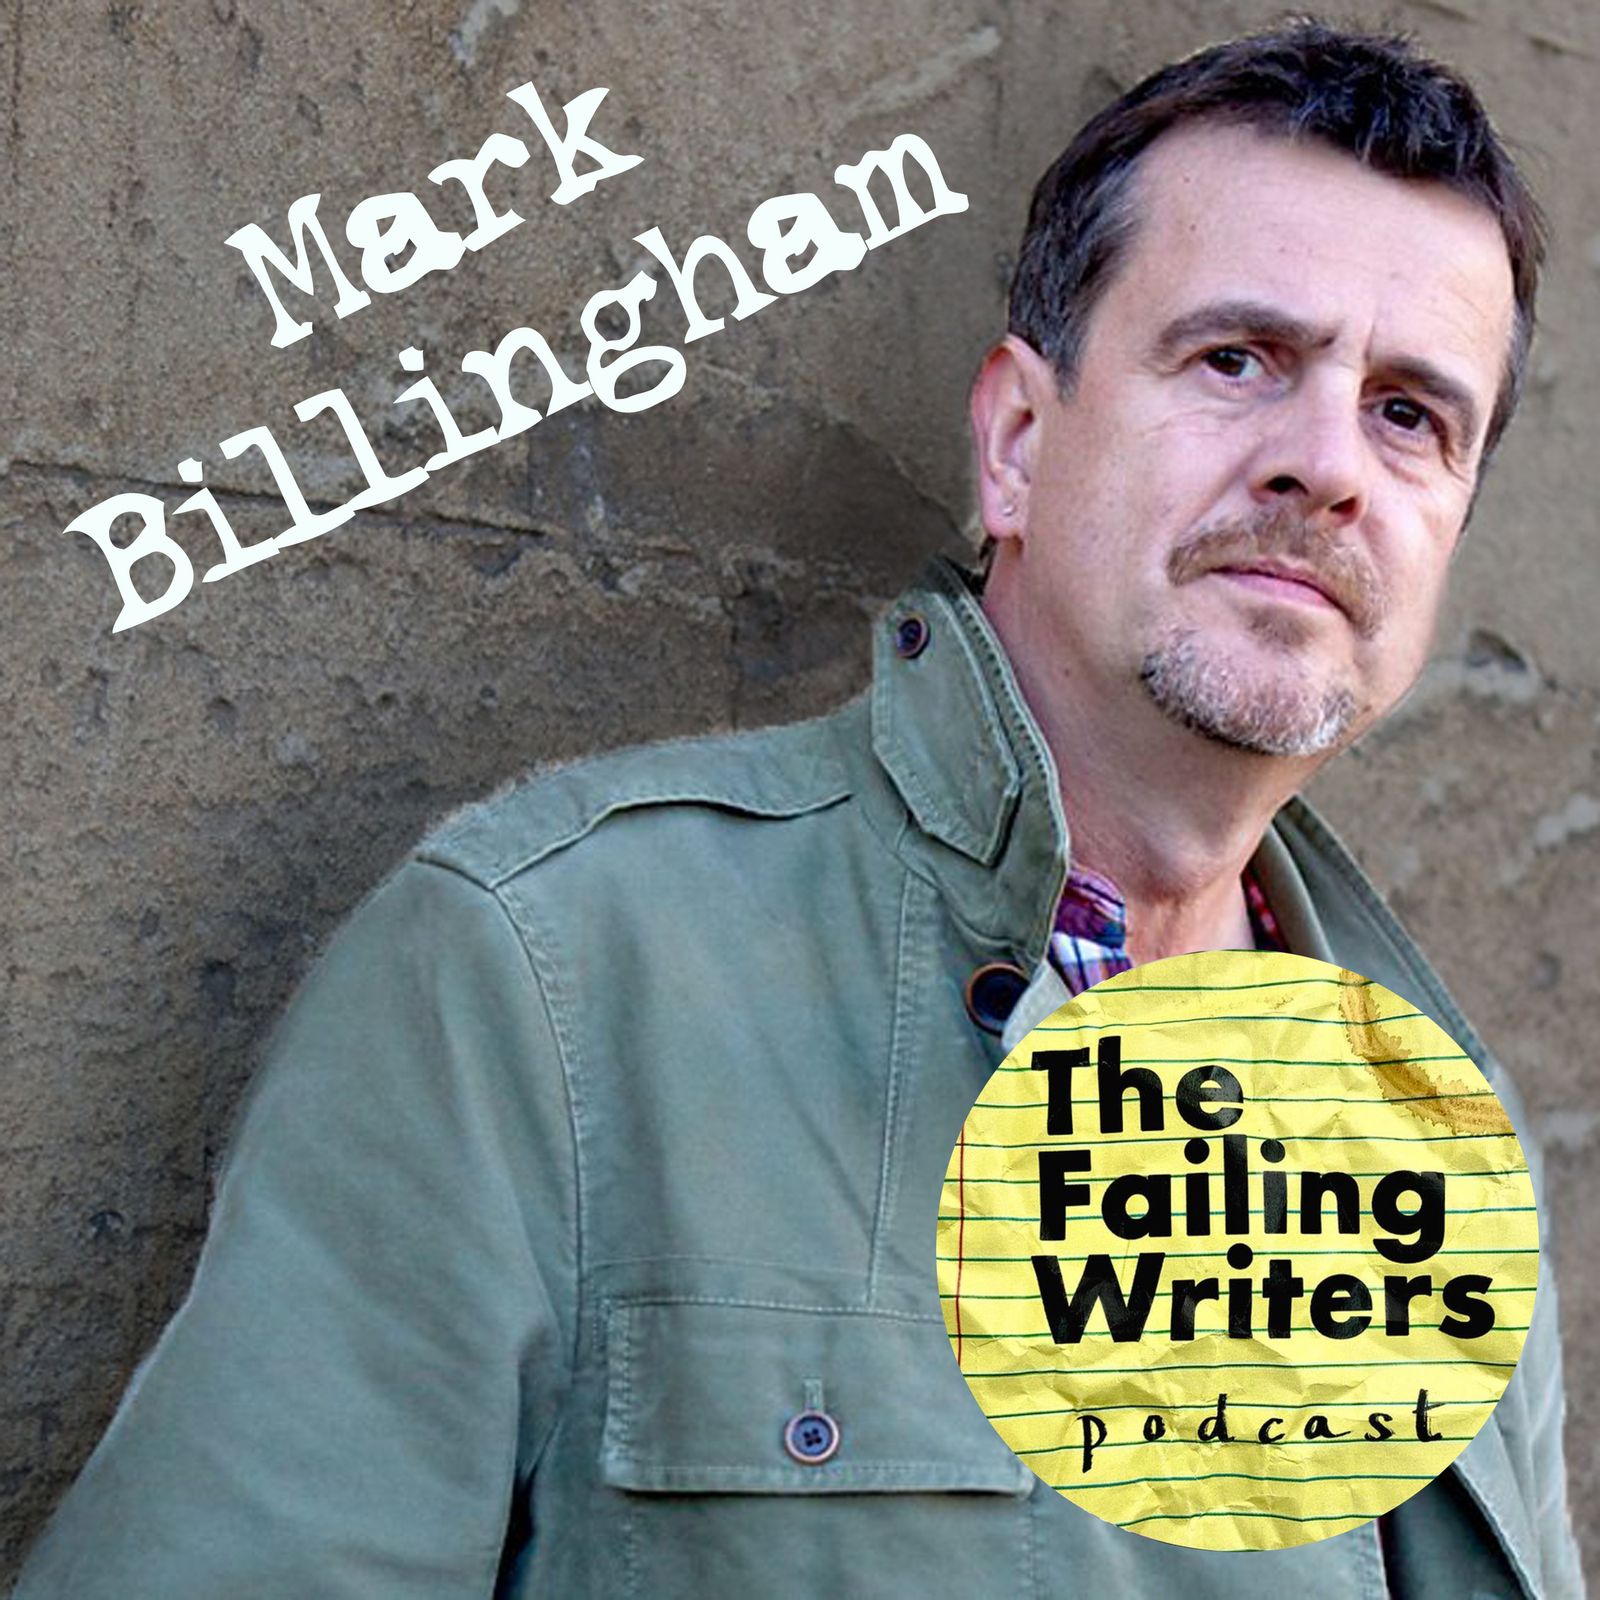 S3 Ep10: Crime Writing with Mark Billingham